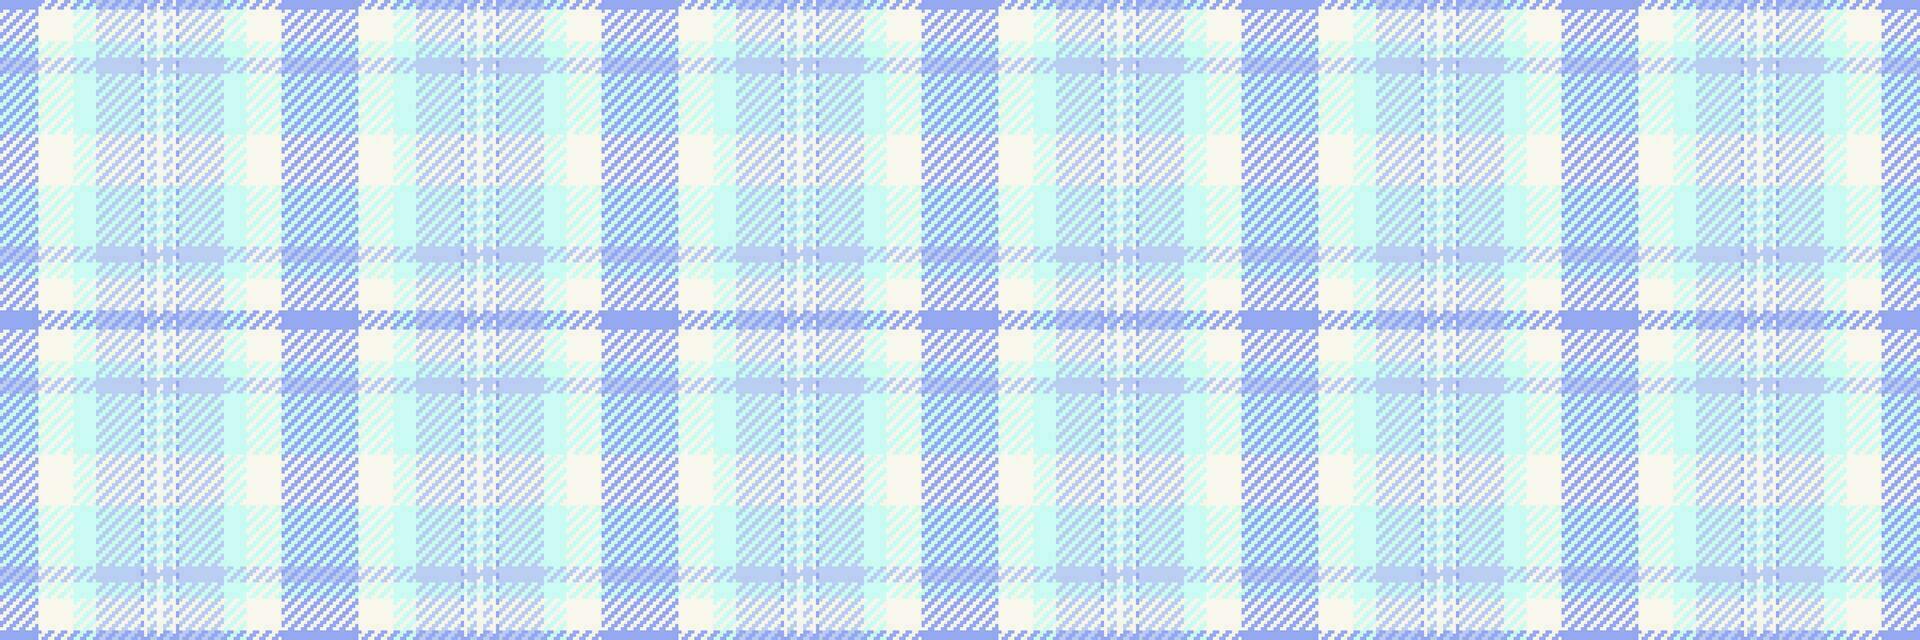 Sensual fabric tartan vector, setting background check seamless. Strip textile texture pattern plaid in light and sea shell colors. vector